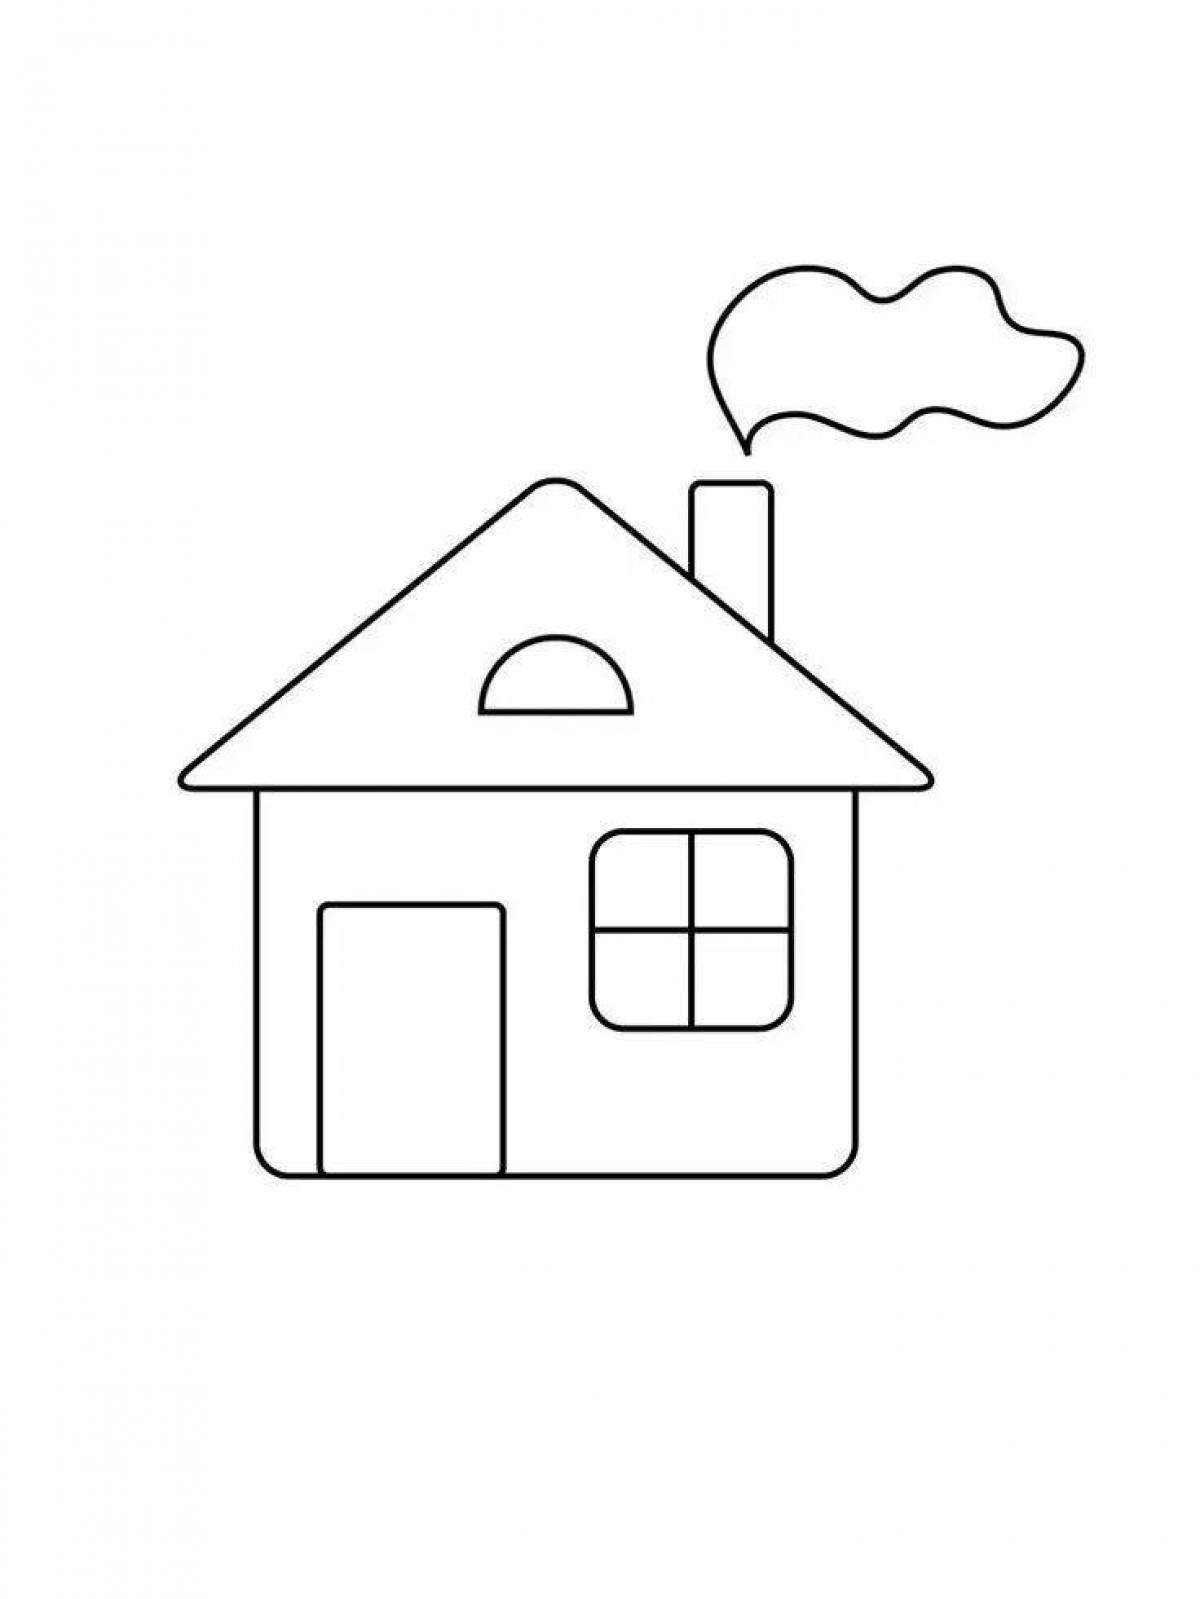 Coloring book magic house for kids